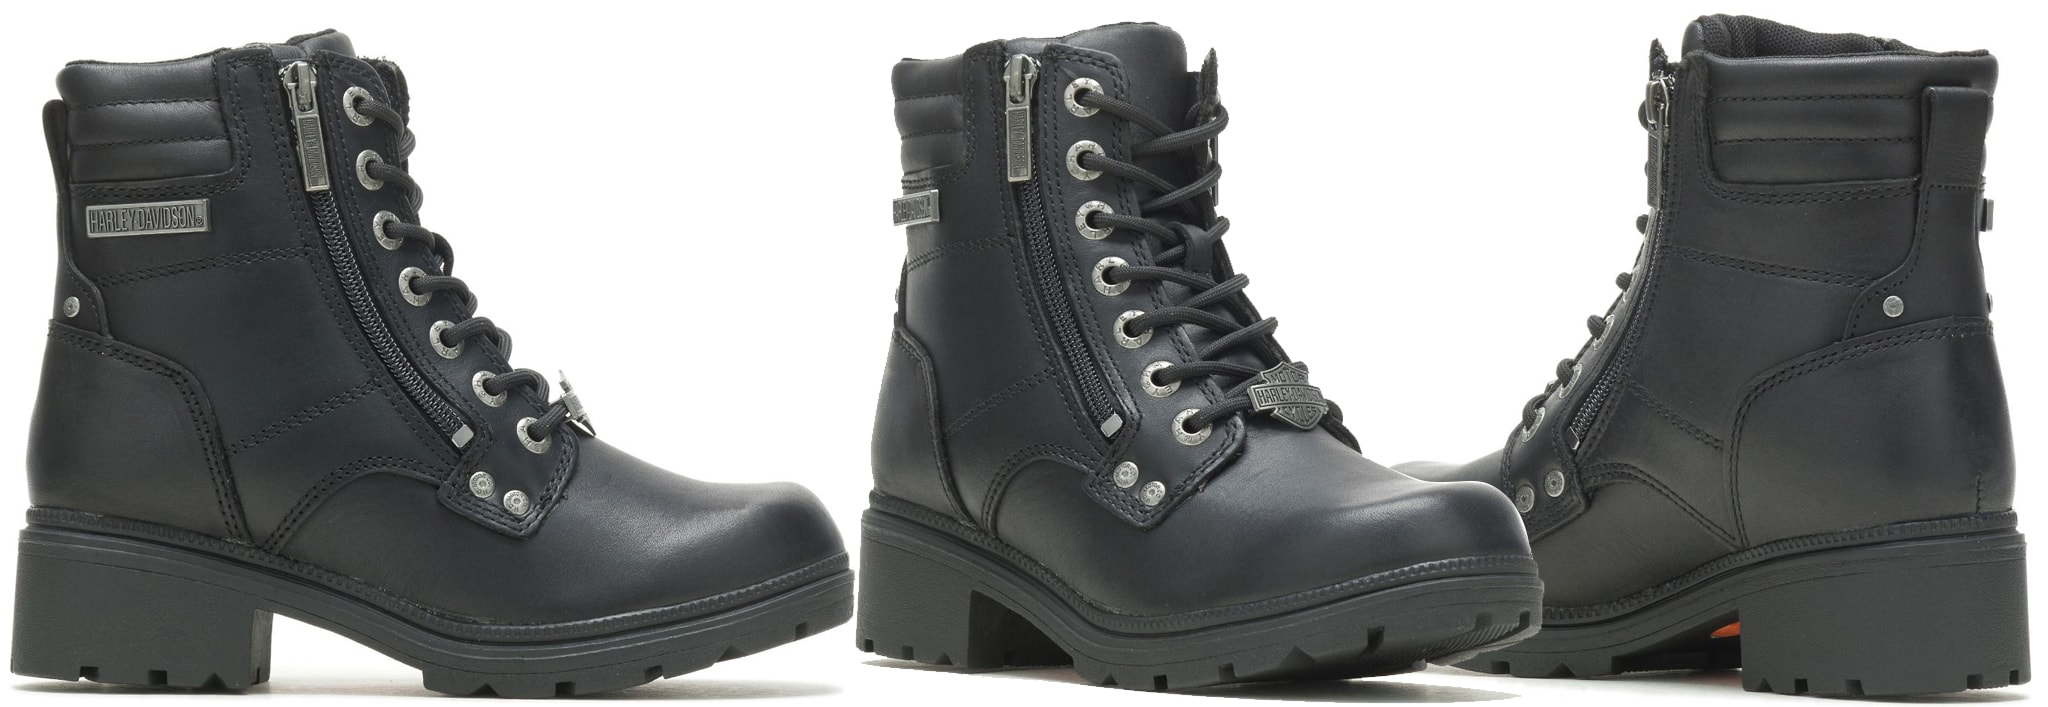 Harley Davidson's Inman Mills is a short leather lace-up boot with sturdy cement construction and functional zippers for style and fit